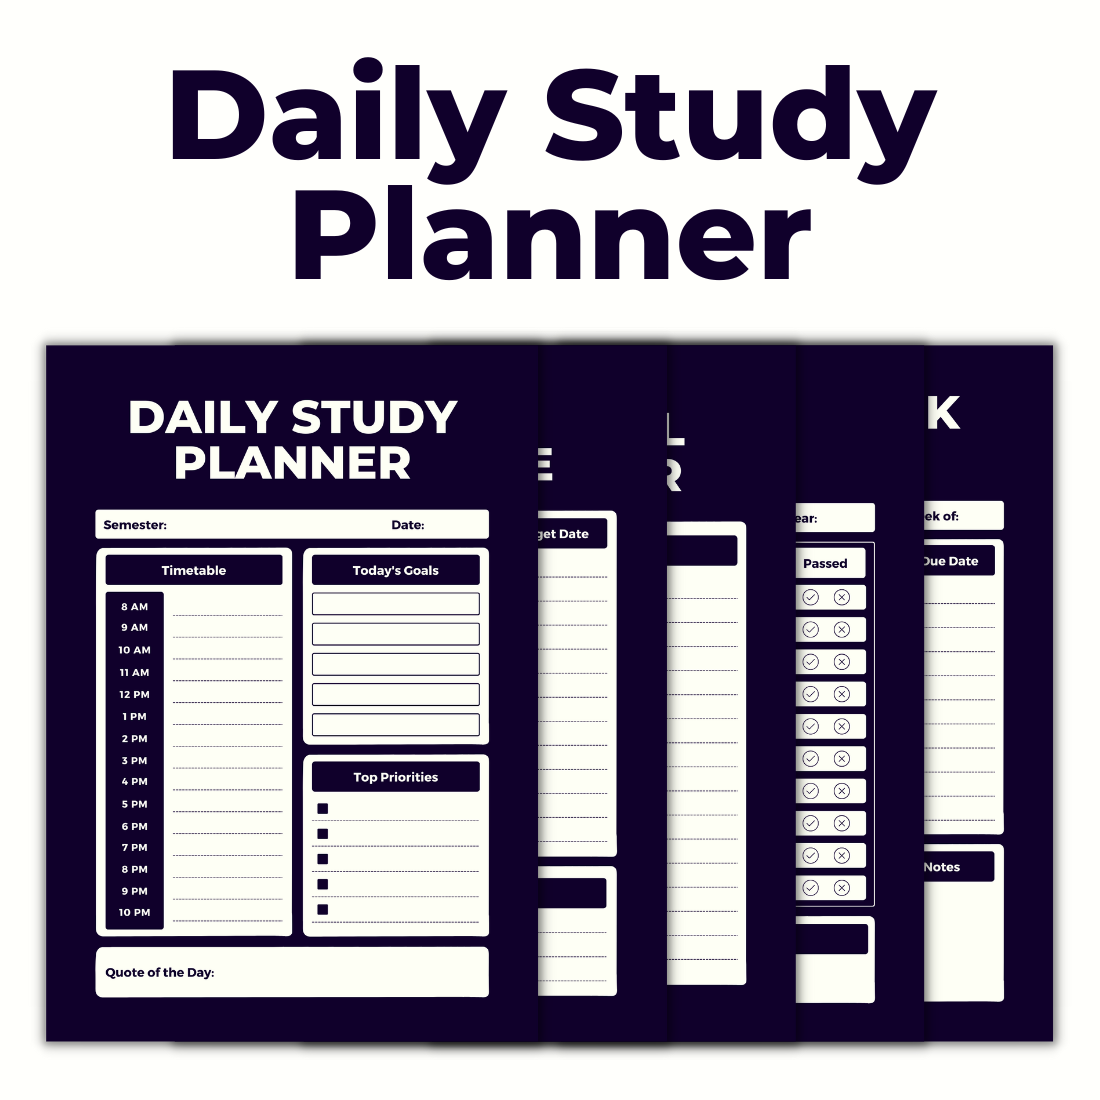 Minimalist Daily Study Planner Canva Template cover image.